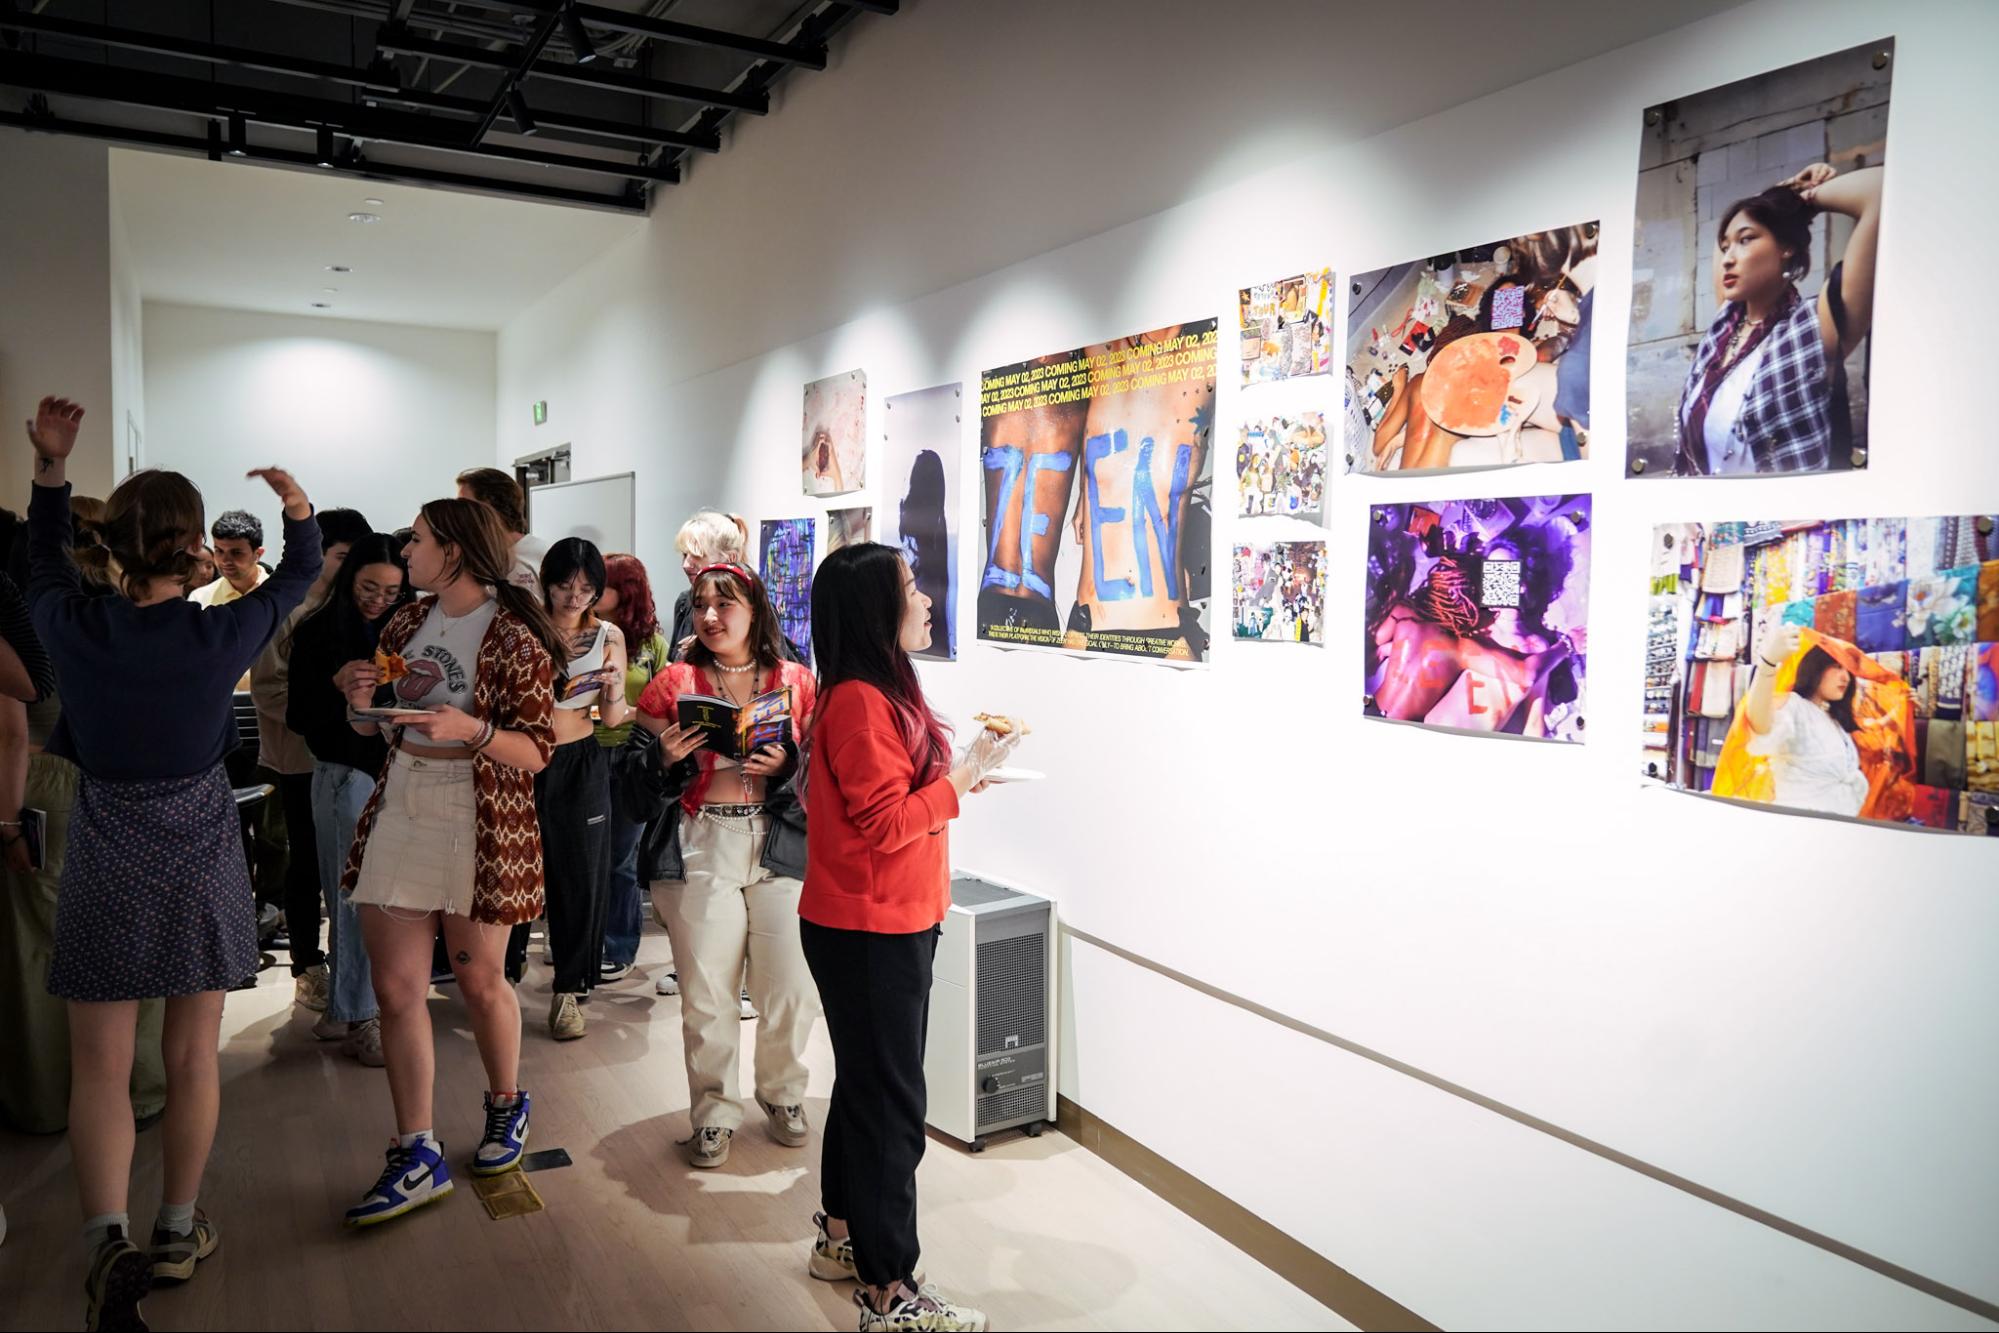 A crowd of students next to a wall covered in large art prints